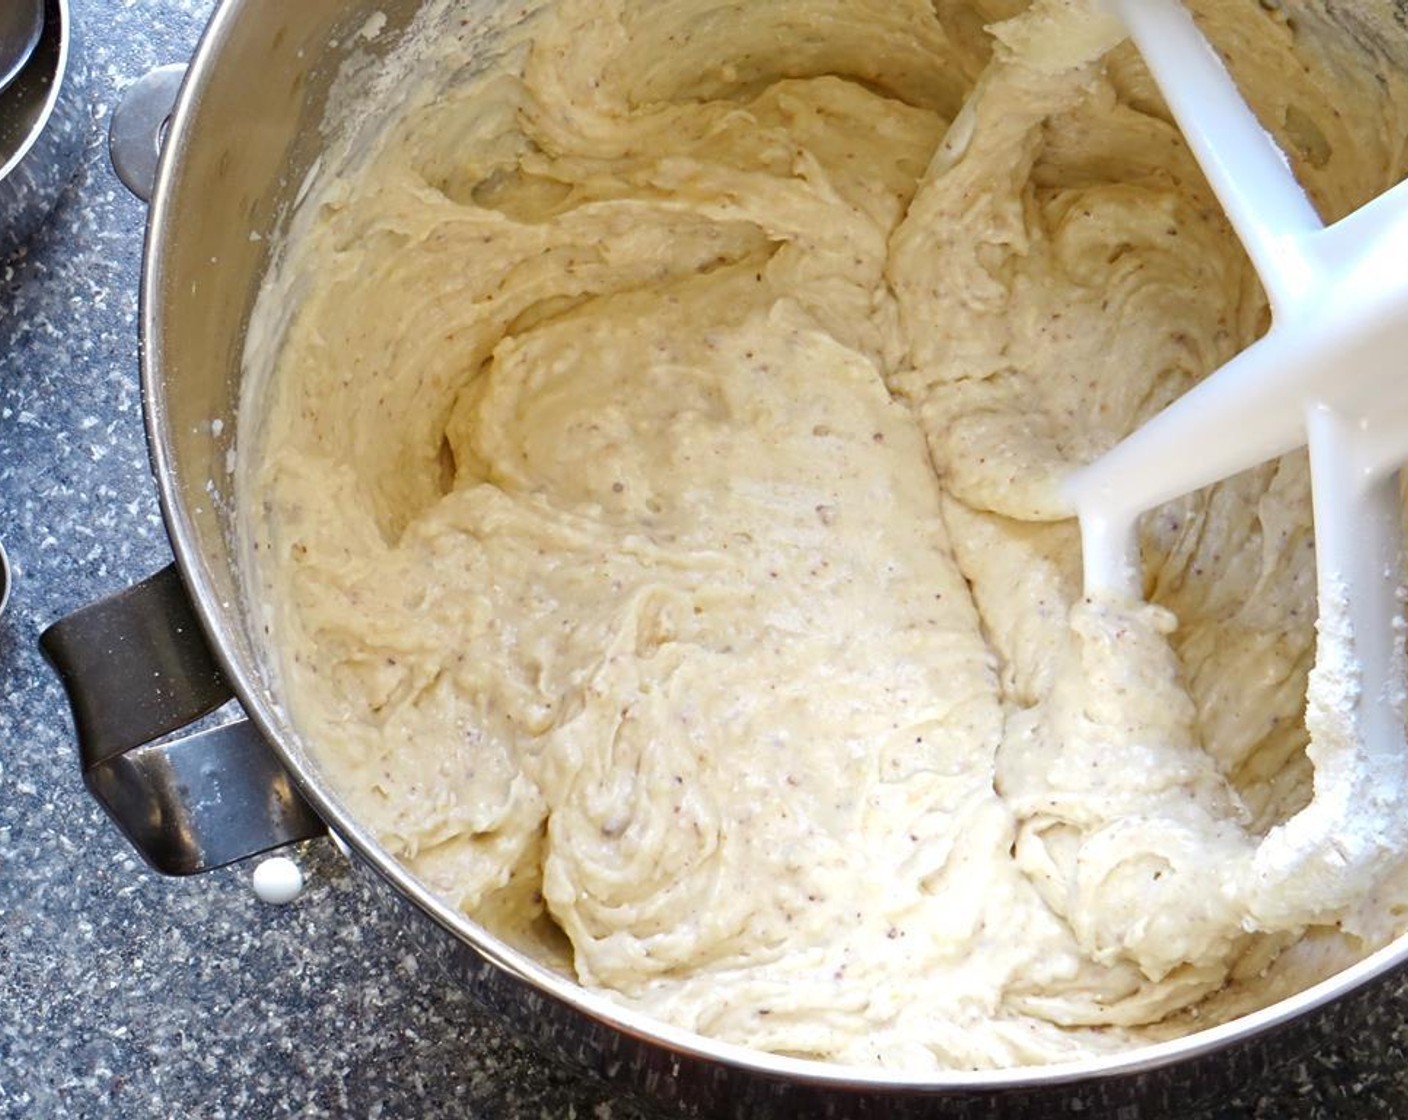 step 8 Add a third of the flour mixture and mix on low speed until just combined. Add 1/2 of the cream mixture and mix until just combined. Follow in the same manner with 1/3 flour, the rest of the cream and finally the last of the flour. Don't over mix.